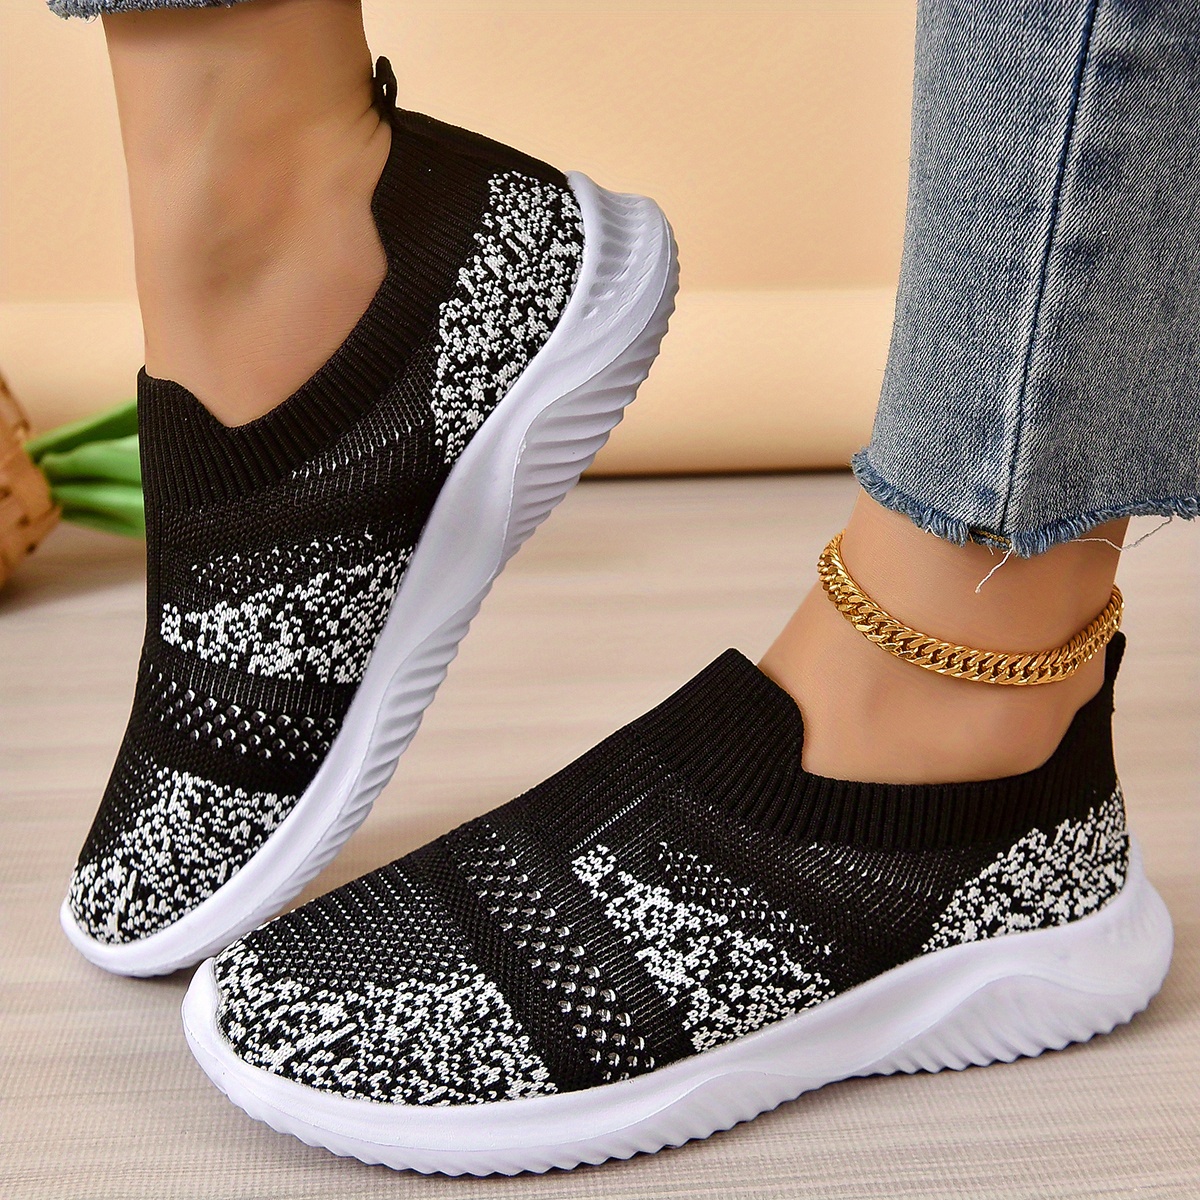 CEHVOM Fashion Women Shoe Soft-soled Comfortable Flying Woven